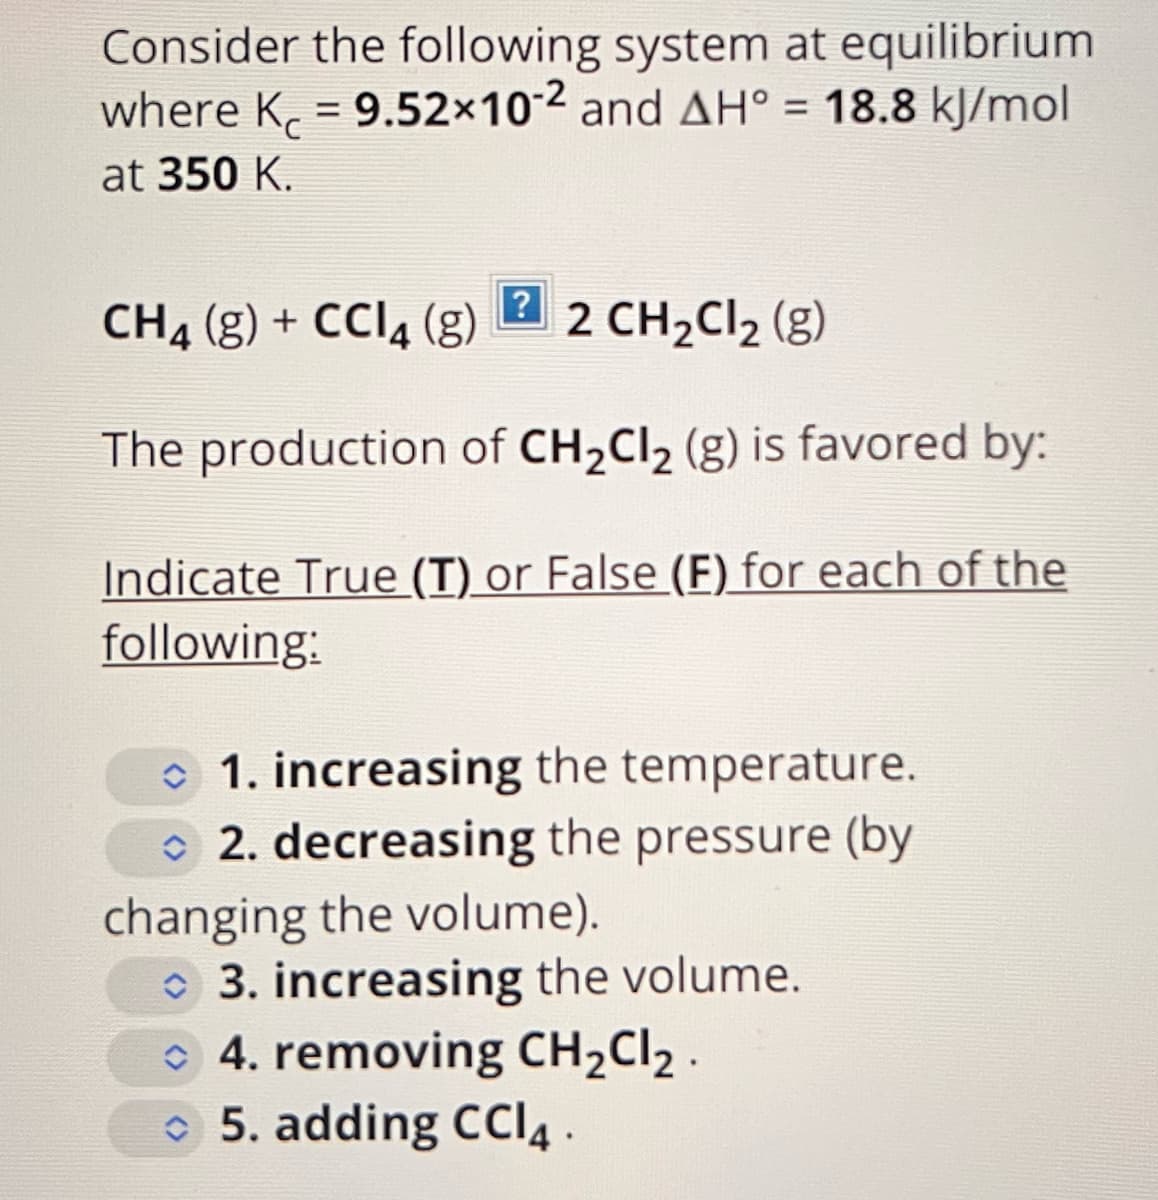 Consider the following system at equilibrium
where K = 9.52x10-2 and AH° = 18.8 kJ/mol
at 350 K.
?
CH4 (g) + CCl4 (g)
2 CH₂Cl₂ (g)
The production of CH₂Cl₂ (g) is favored by:
Indicate True (T) or False (F) for each of the
following:
1. increasing the temperature.
2. decreasing the pressure (by
changing the volume).
3. increasing the volume.
4. removing CH₂Cl₂.
5. adding CCI4.